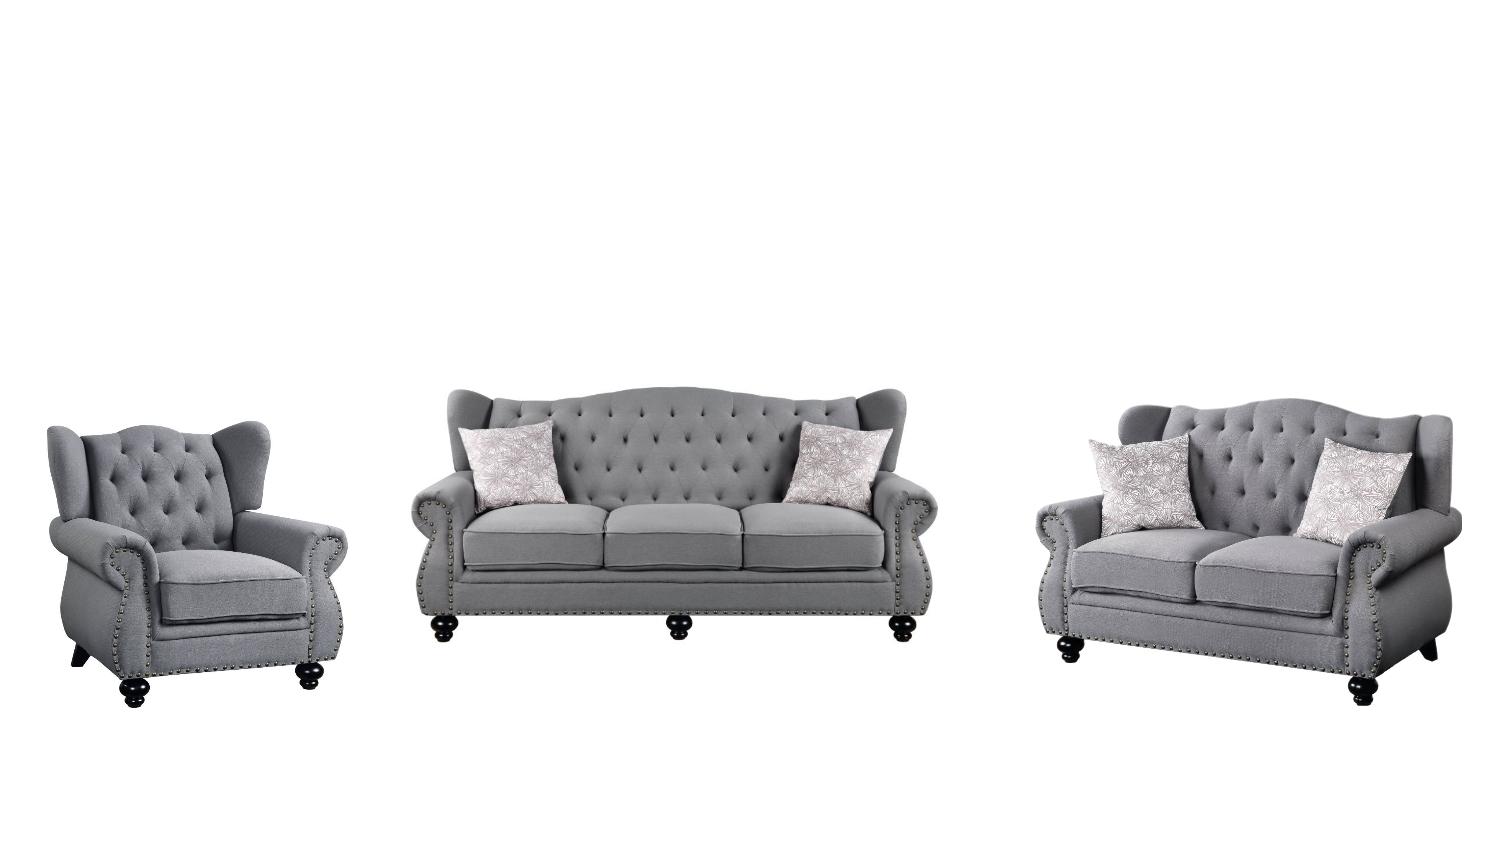 Traditional Sofa Loveseat and Chair Set Hannes 53280-3pcs in Gray Fabric